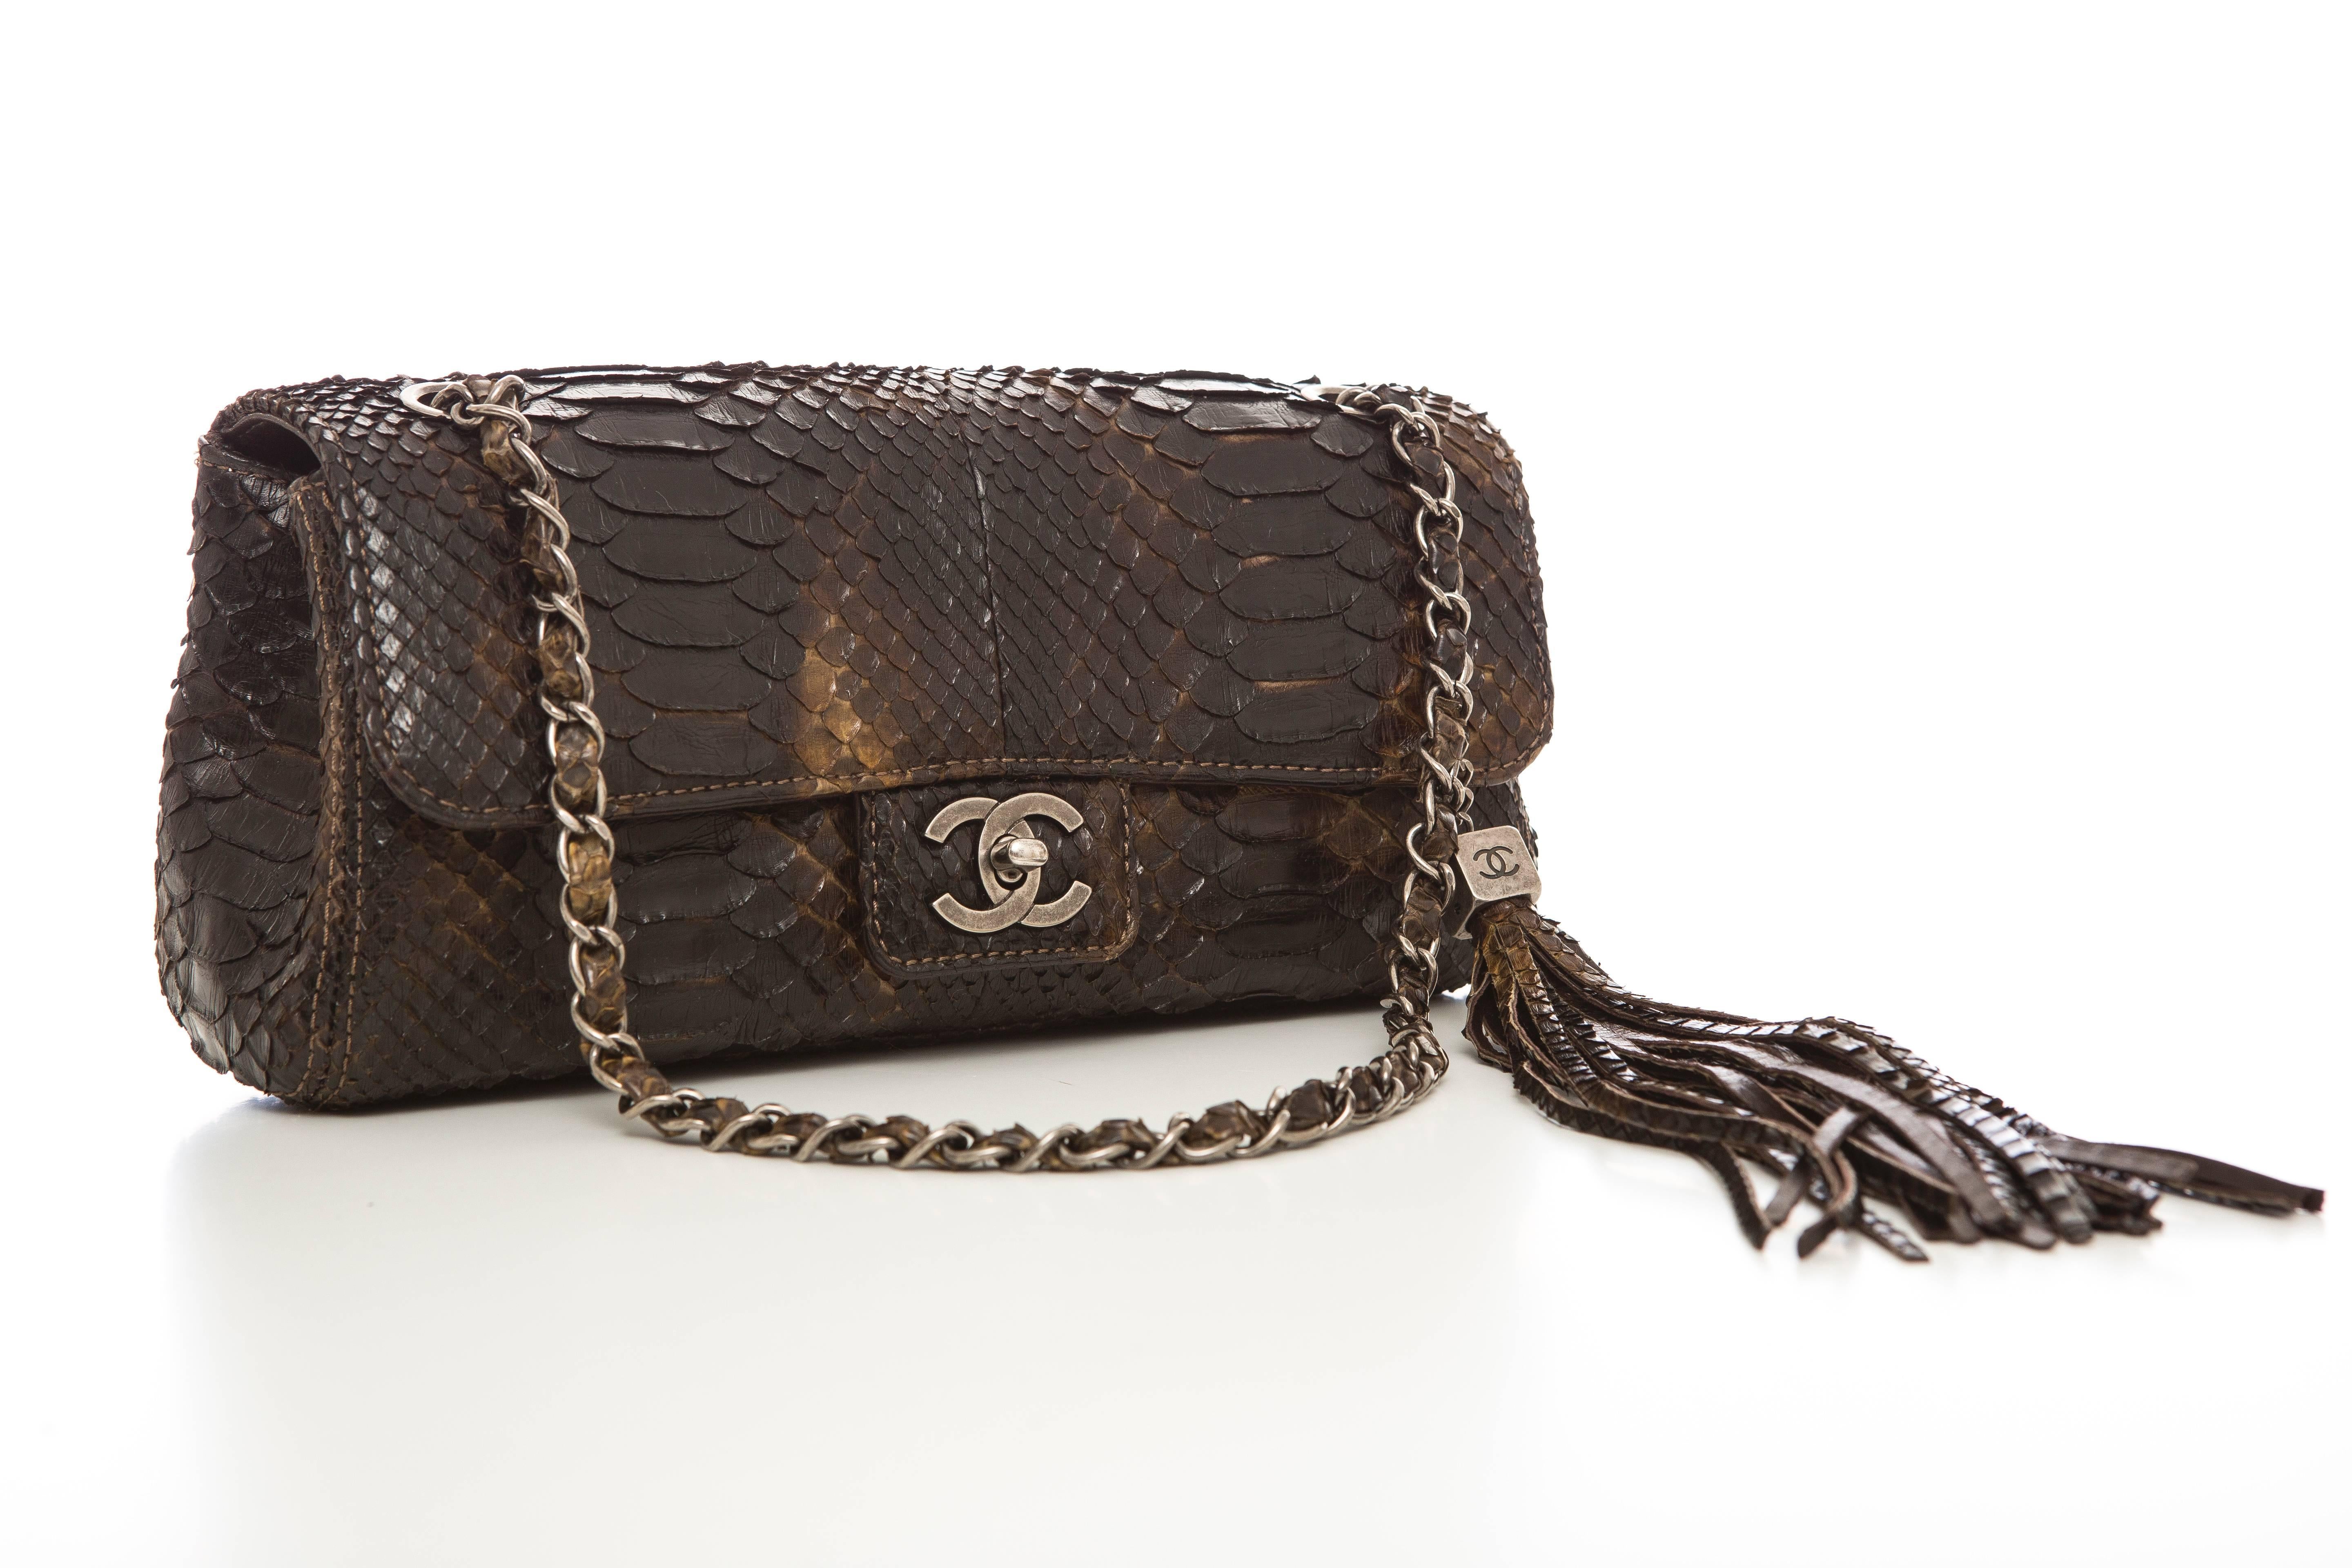 Chanel Soho tassel single flap python medium bag with antiqued silver-tone hardware, curb-chain shoulder strap, tassel charm at side, brown leather interior, two interior wall pockets and CC turn-lock closure at front flap. Comes with dust bag and